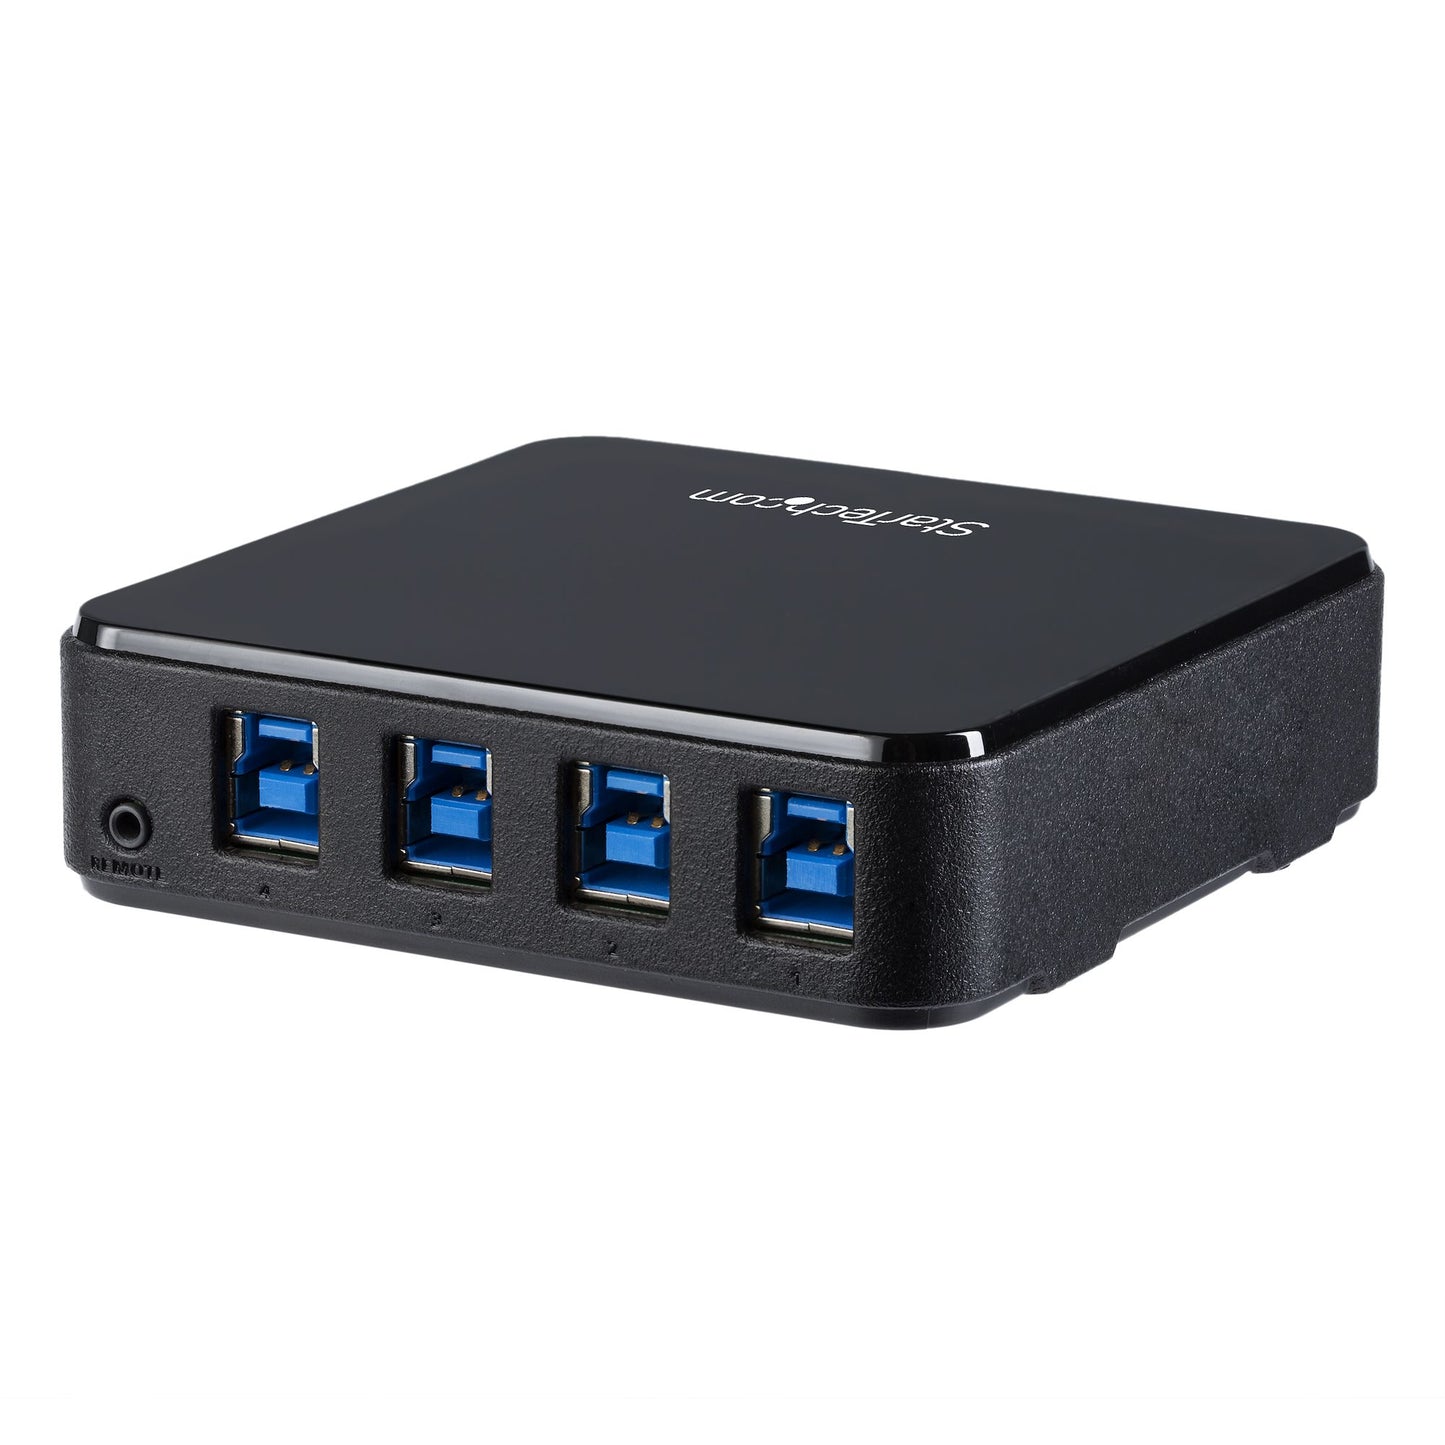 StarTech.com 4 to 4 USB 3.0 Peripheral Sharing Switch-1